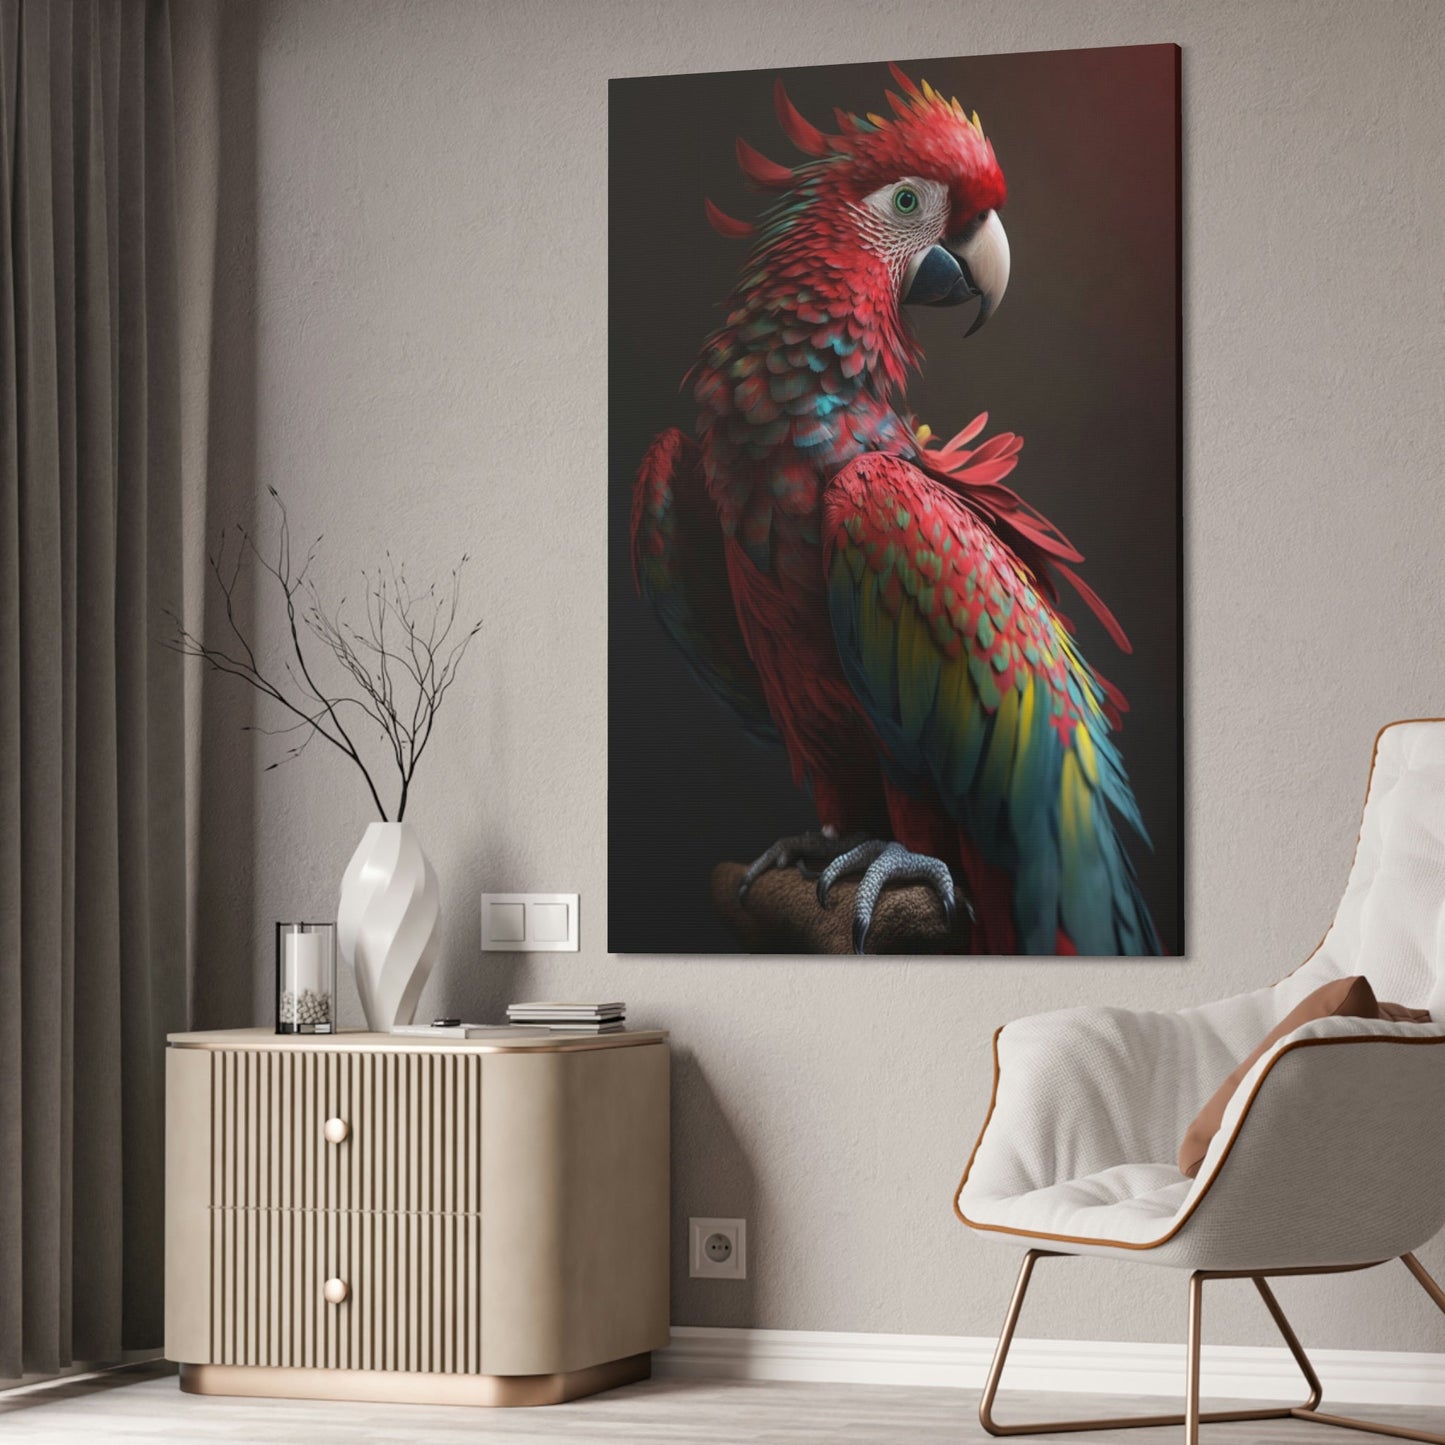 Winged Wonders: A Canvas of Parrot Majesty and Magic